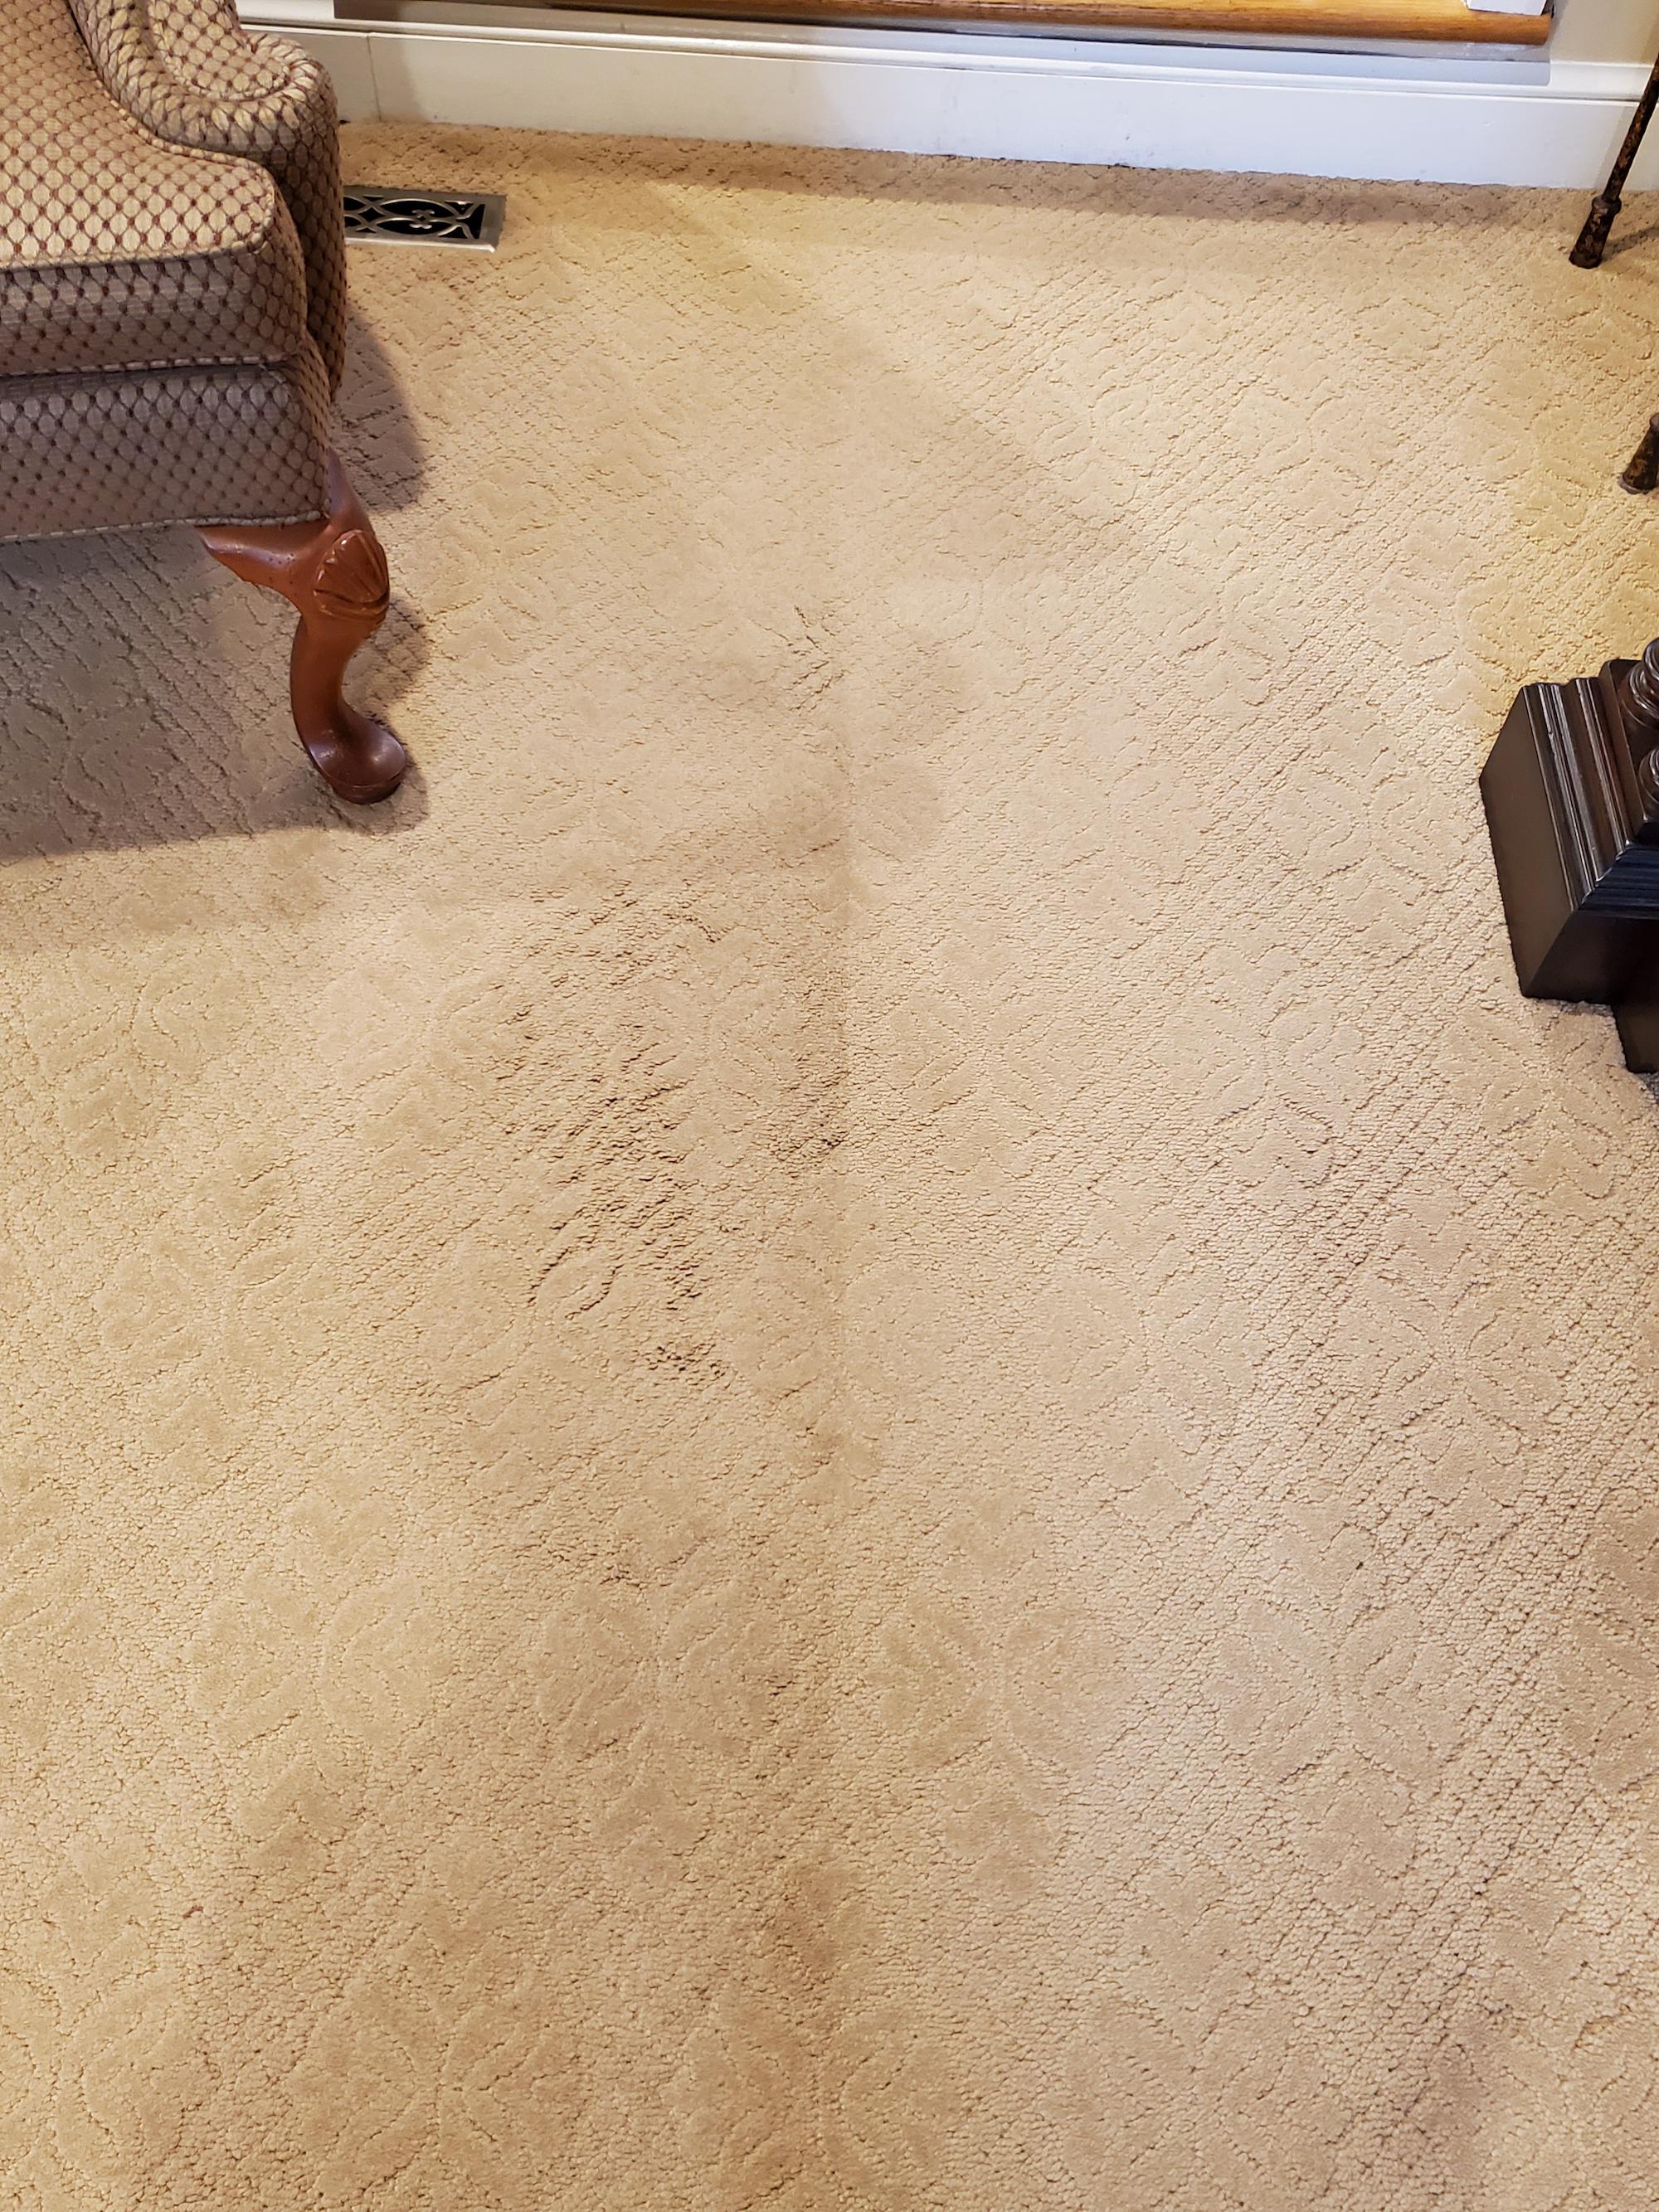 Before and after carpet cleaning in Severna Park